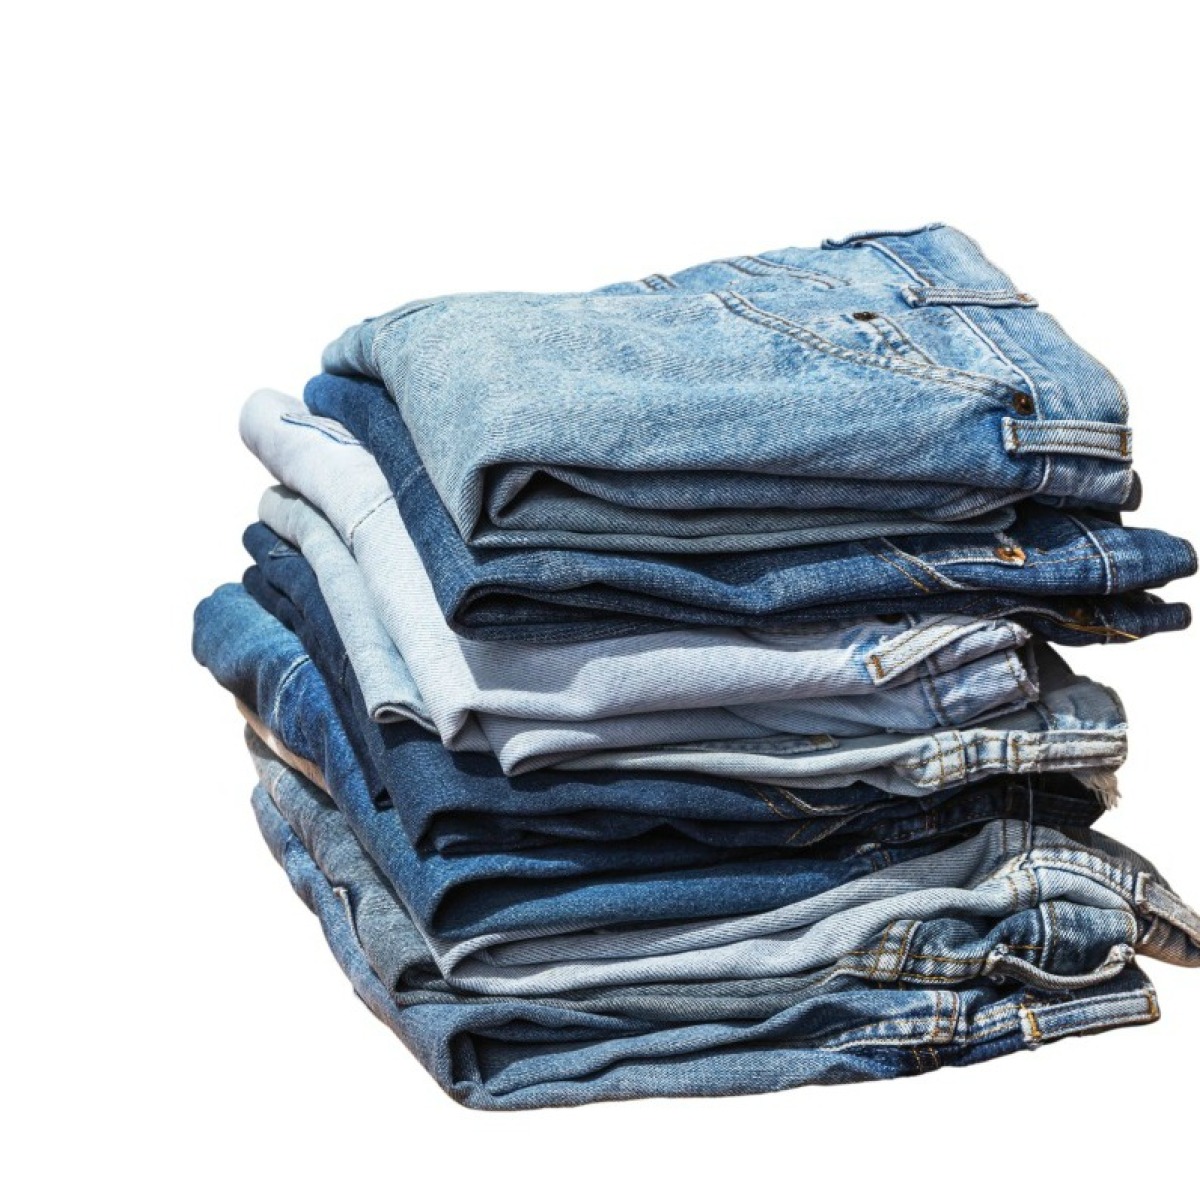 Keeping Jeans from Getting Wrinkled in the Dryer | ThriftyFun